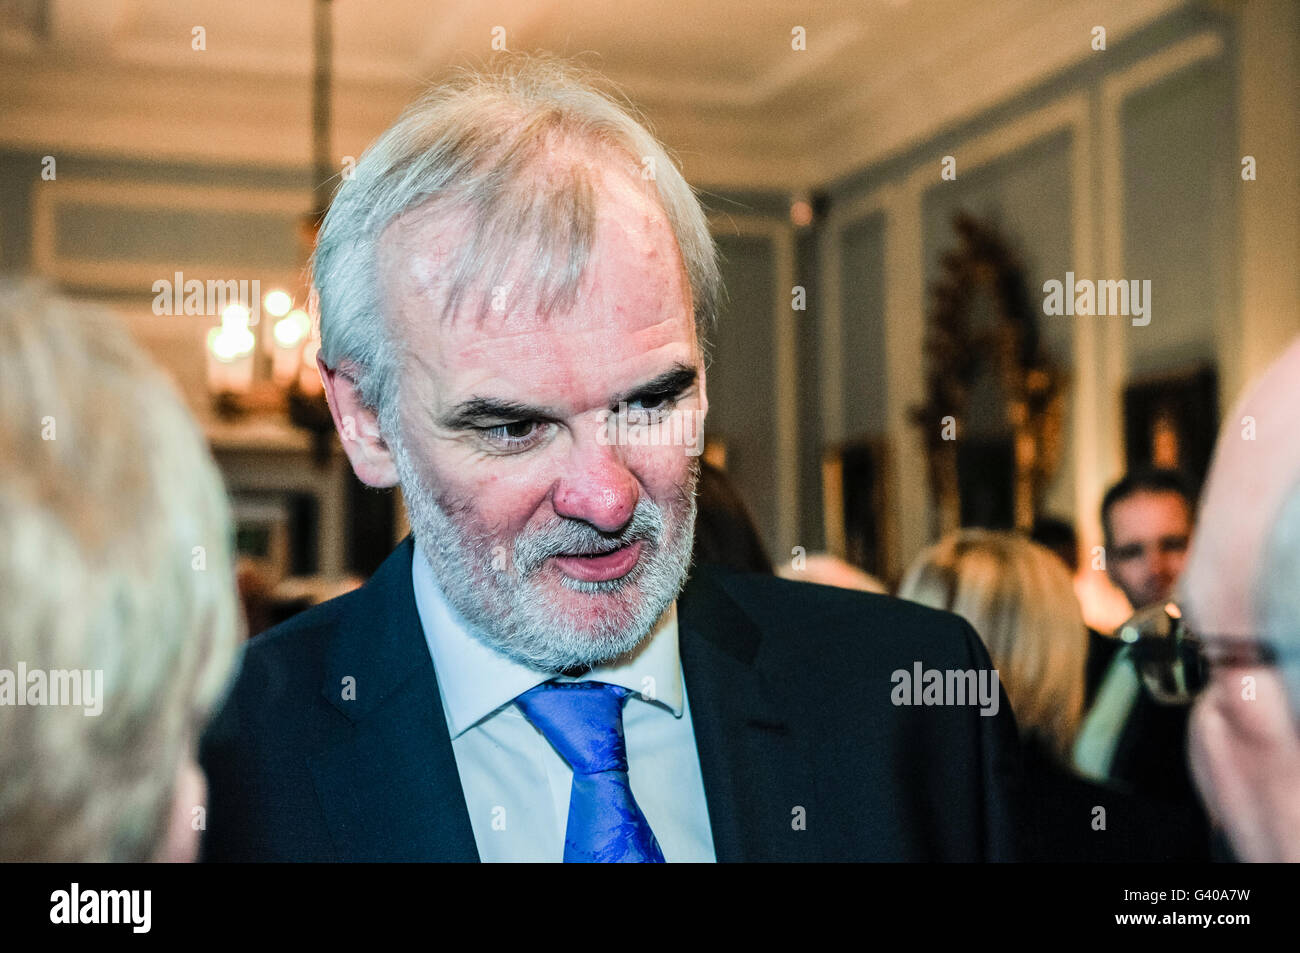 HILLSBOROUGH, NORTHERN IRELAND. 24 MAY 2016 - Northern Ireland actor and comedian Tim McGarry, known for his role as 'Da' in the Hole in the Wall Gang programme 'Give My Head Peace' Stock Photo